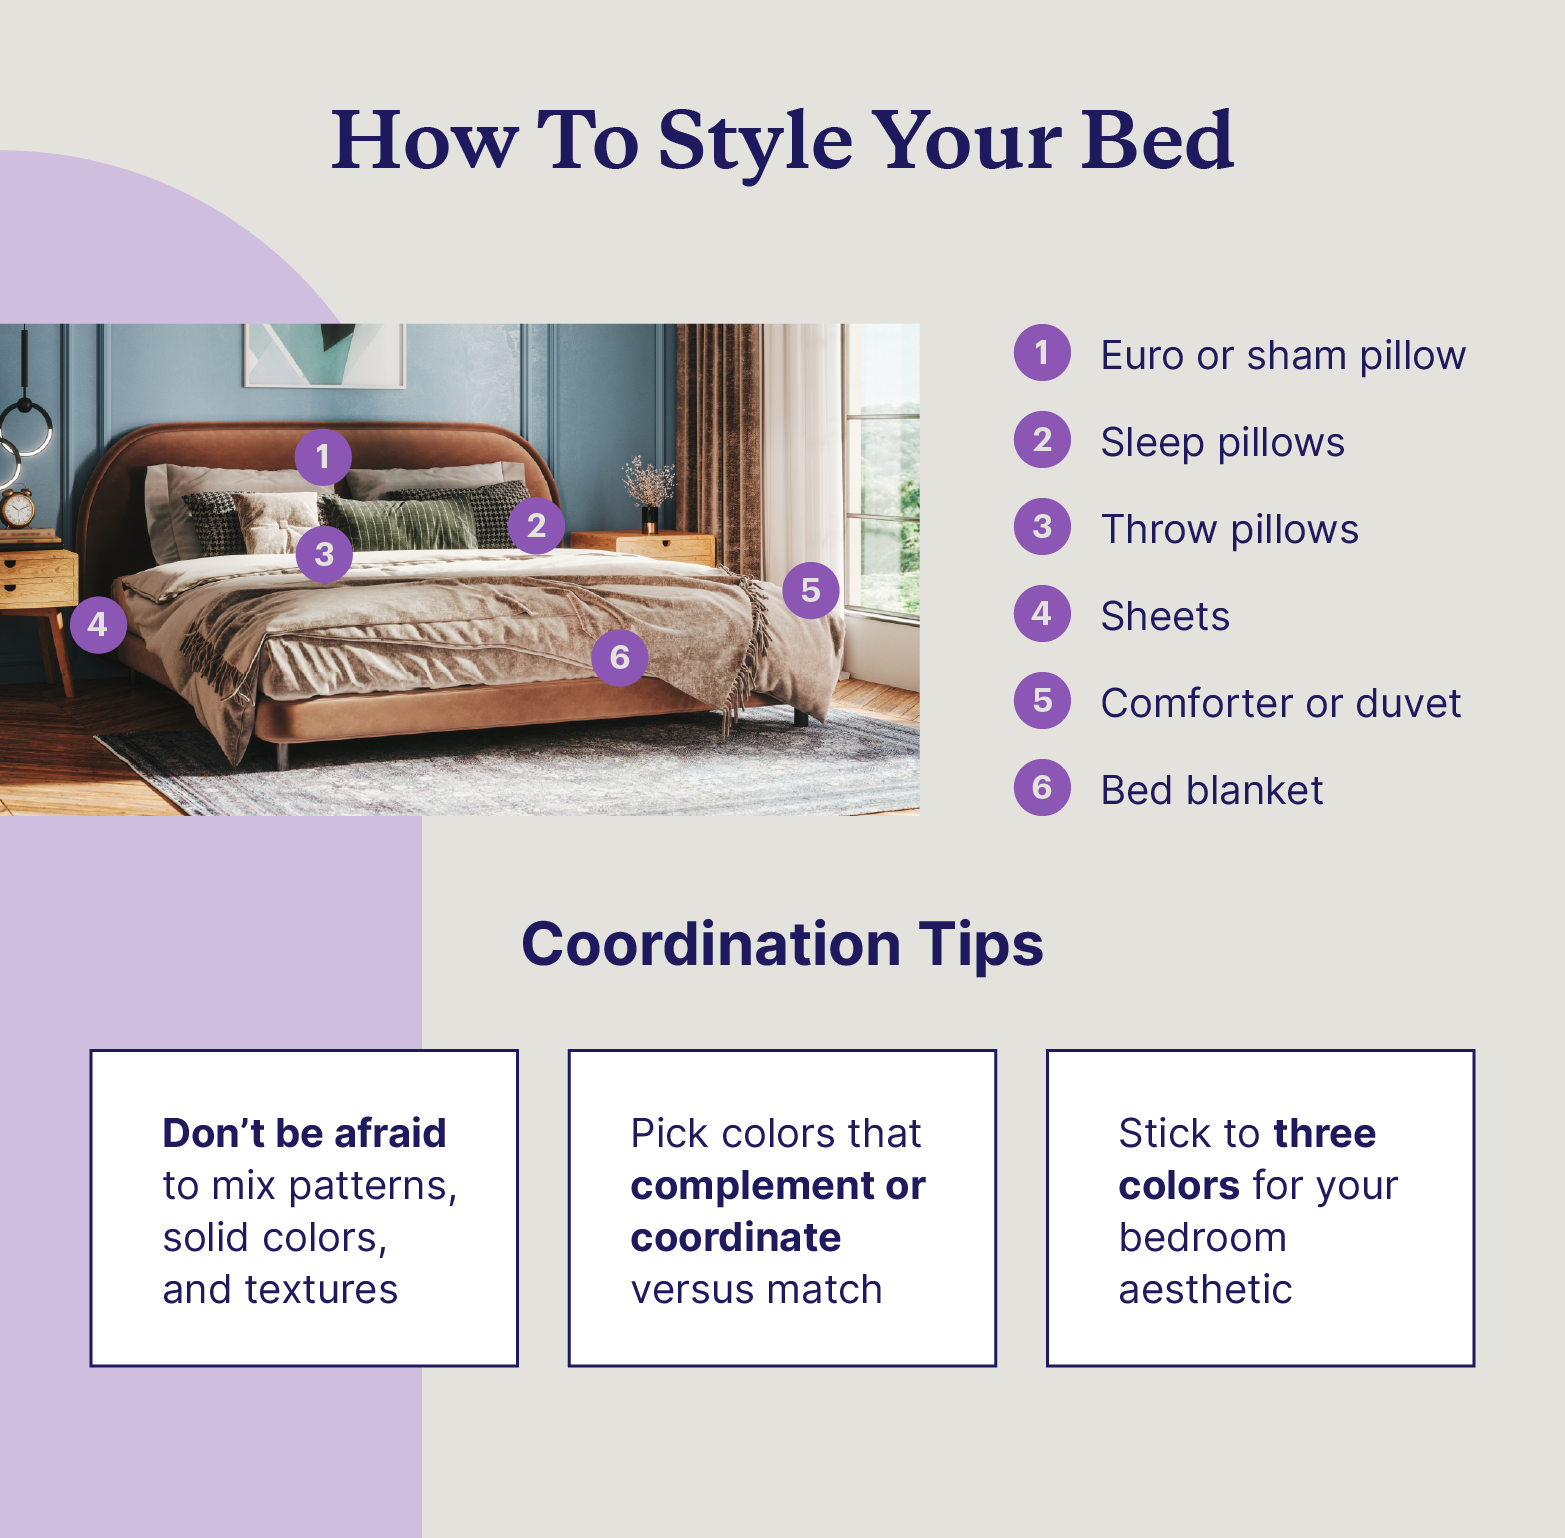 Graphic illustrating style elements to a bed and listing design coordination tips.